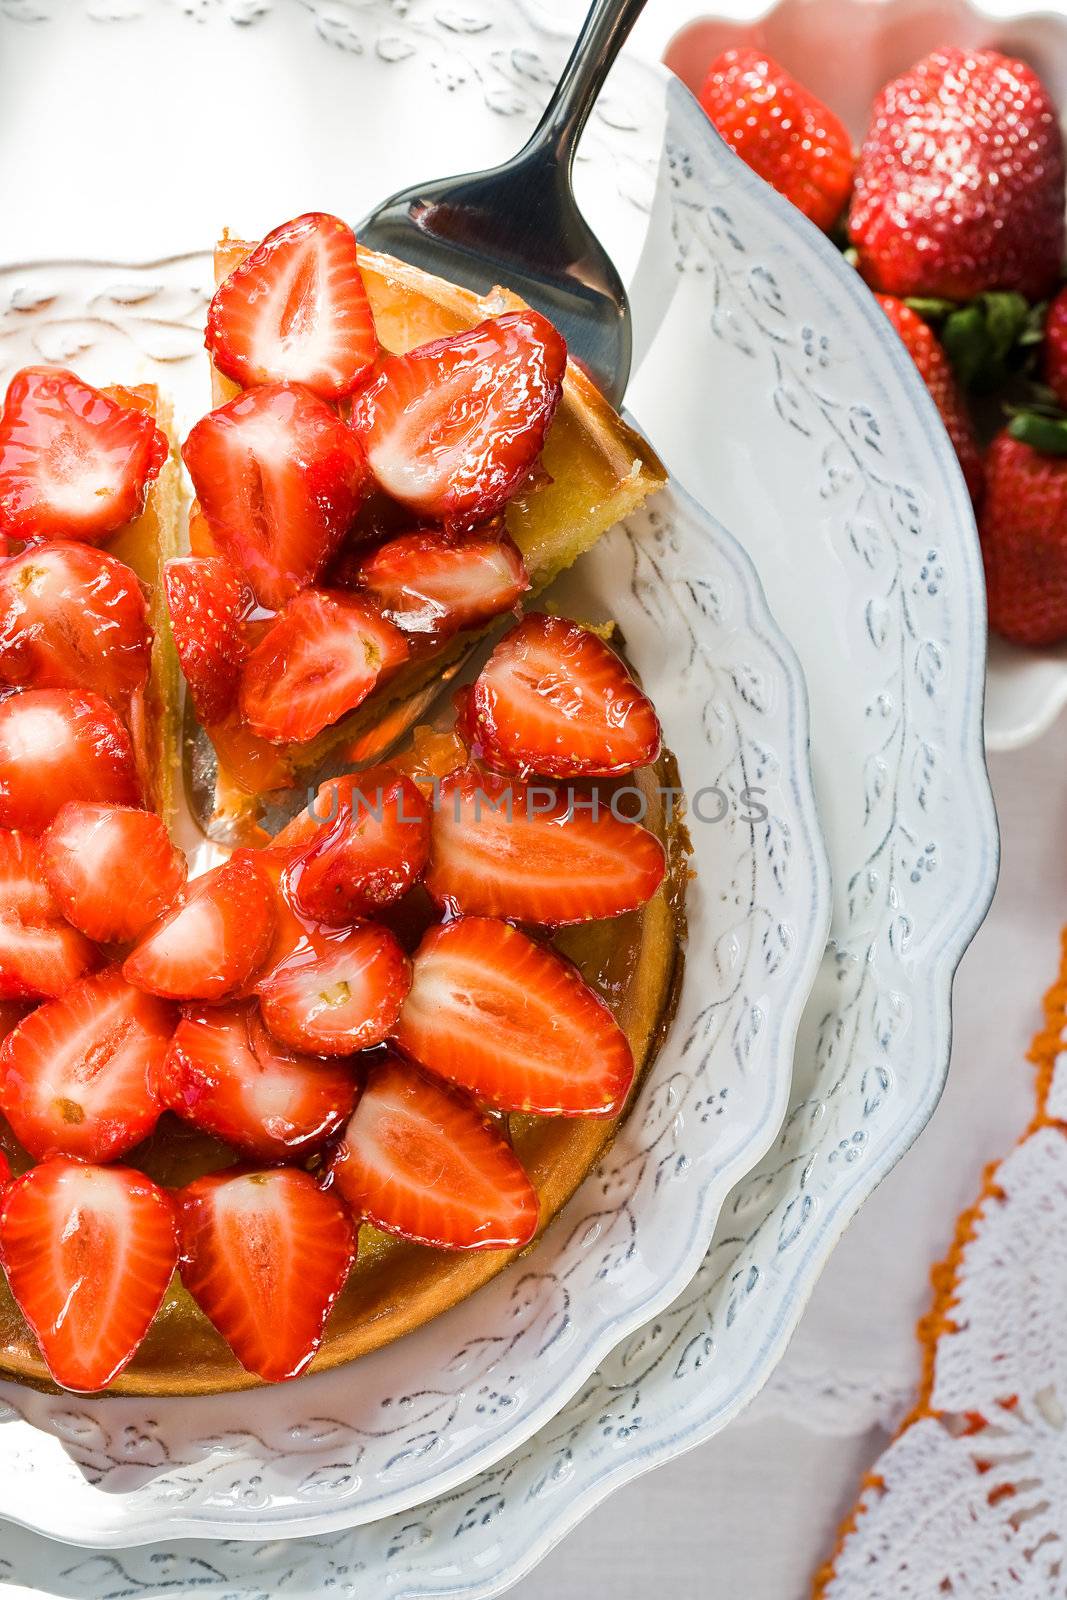 Cheesecake with sliced fresh strawberries on plate
